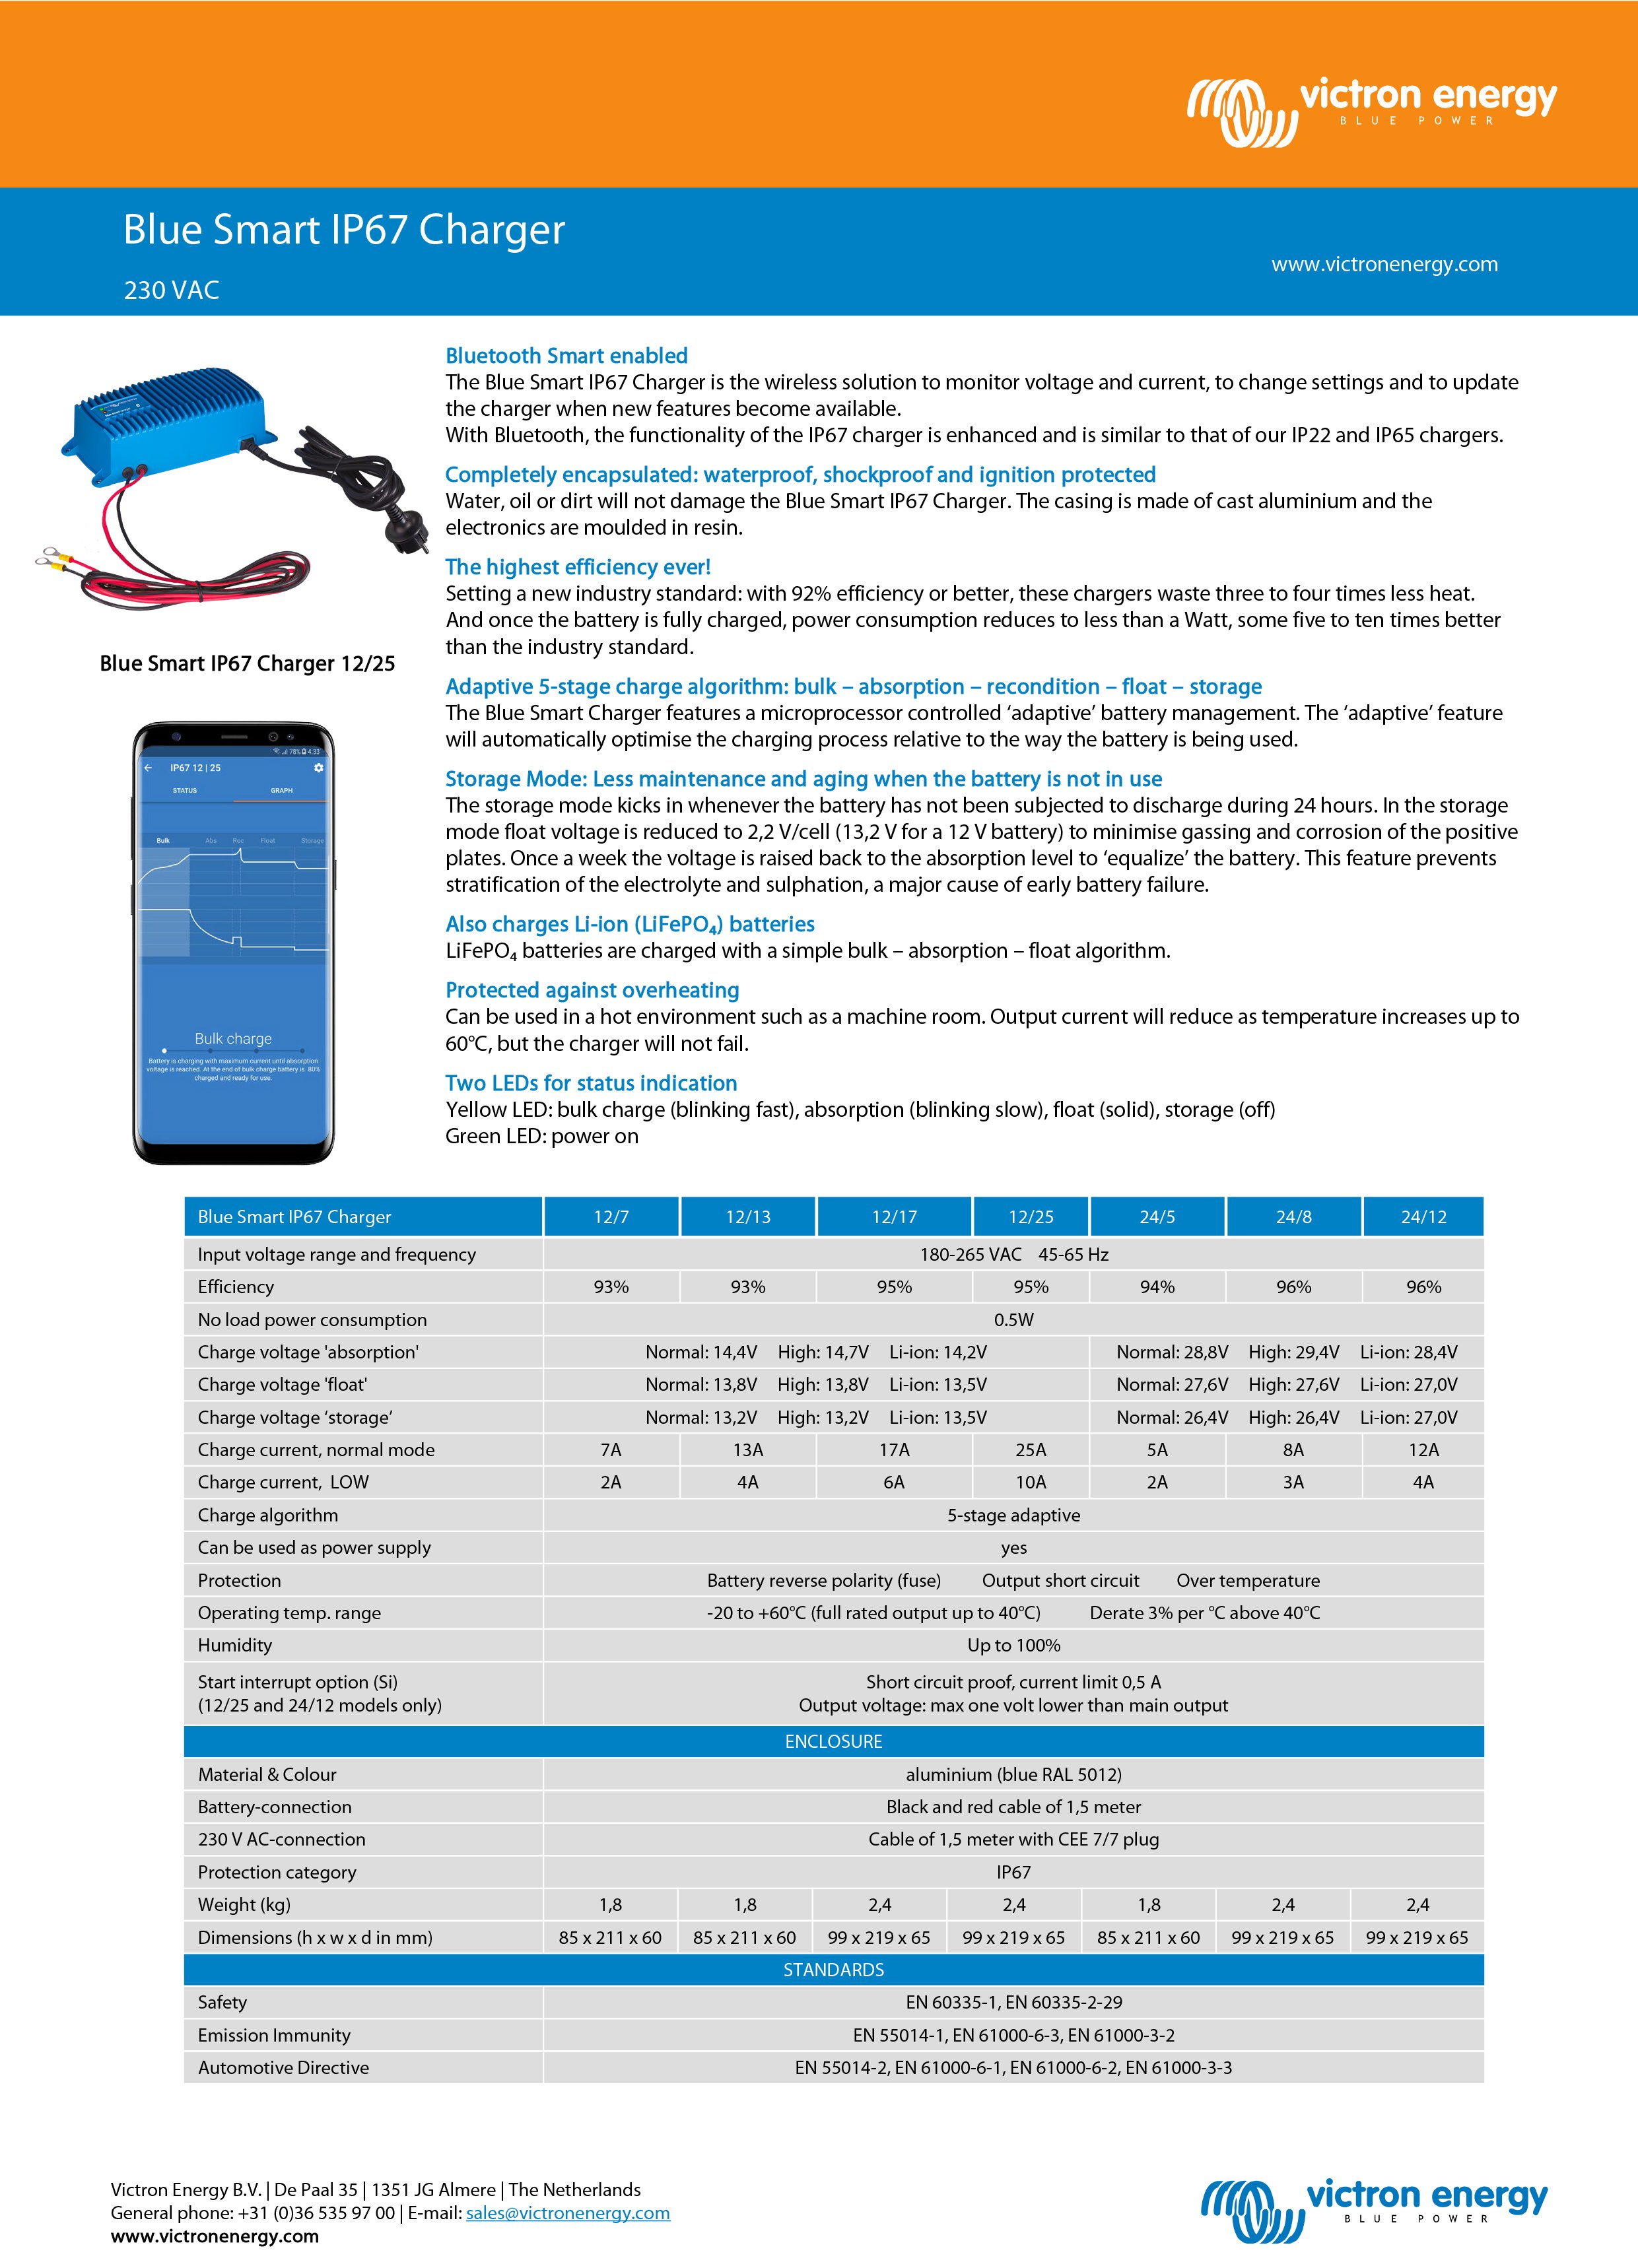 Blue Smart IP67 Charger 24/12 (1+Si)